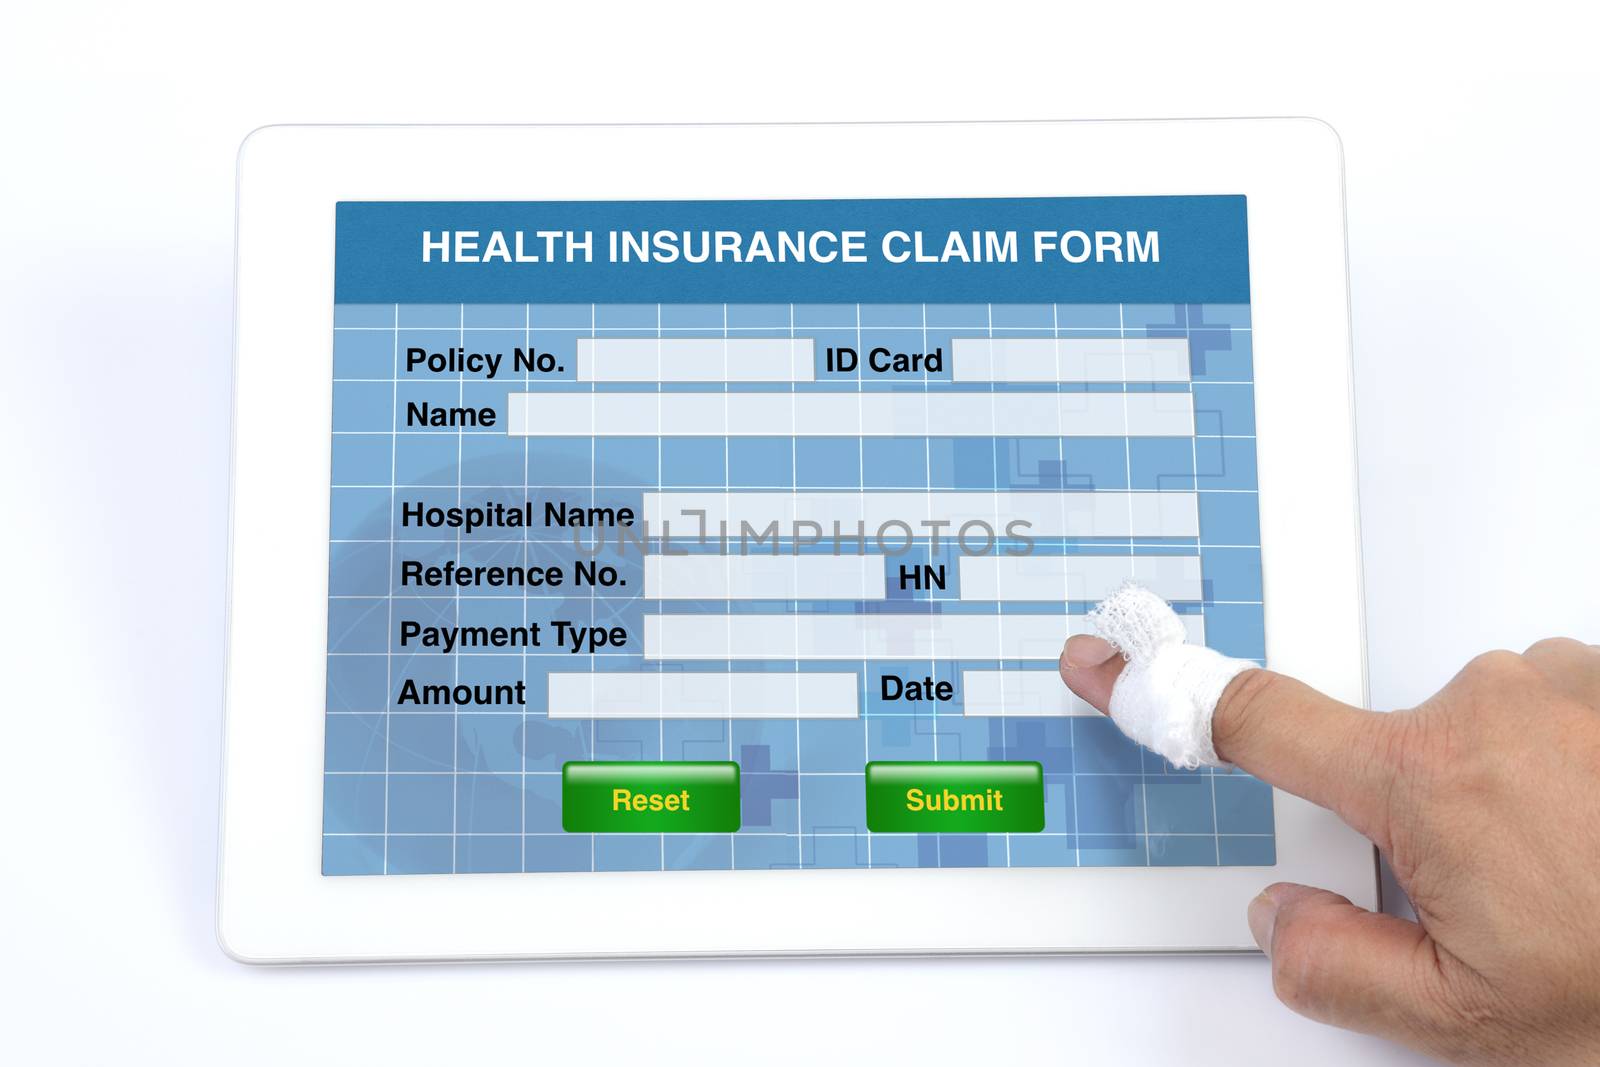 Health insurance claim form on tablet. by pandpstock_002